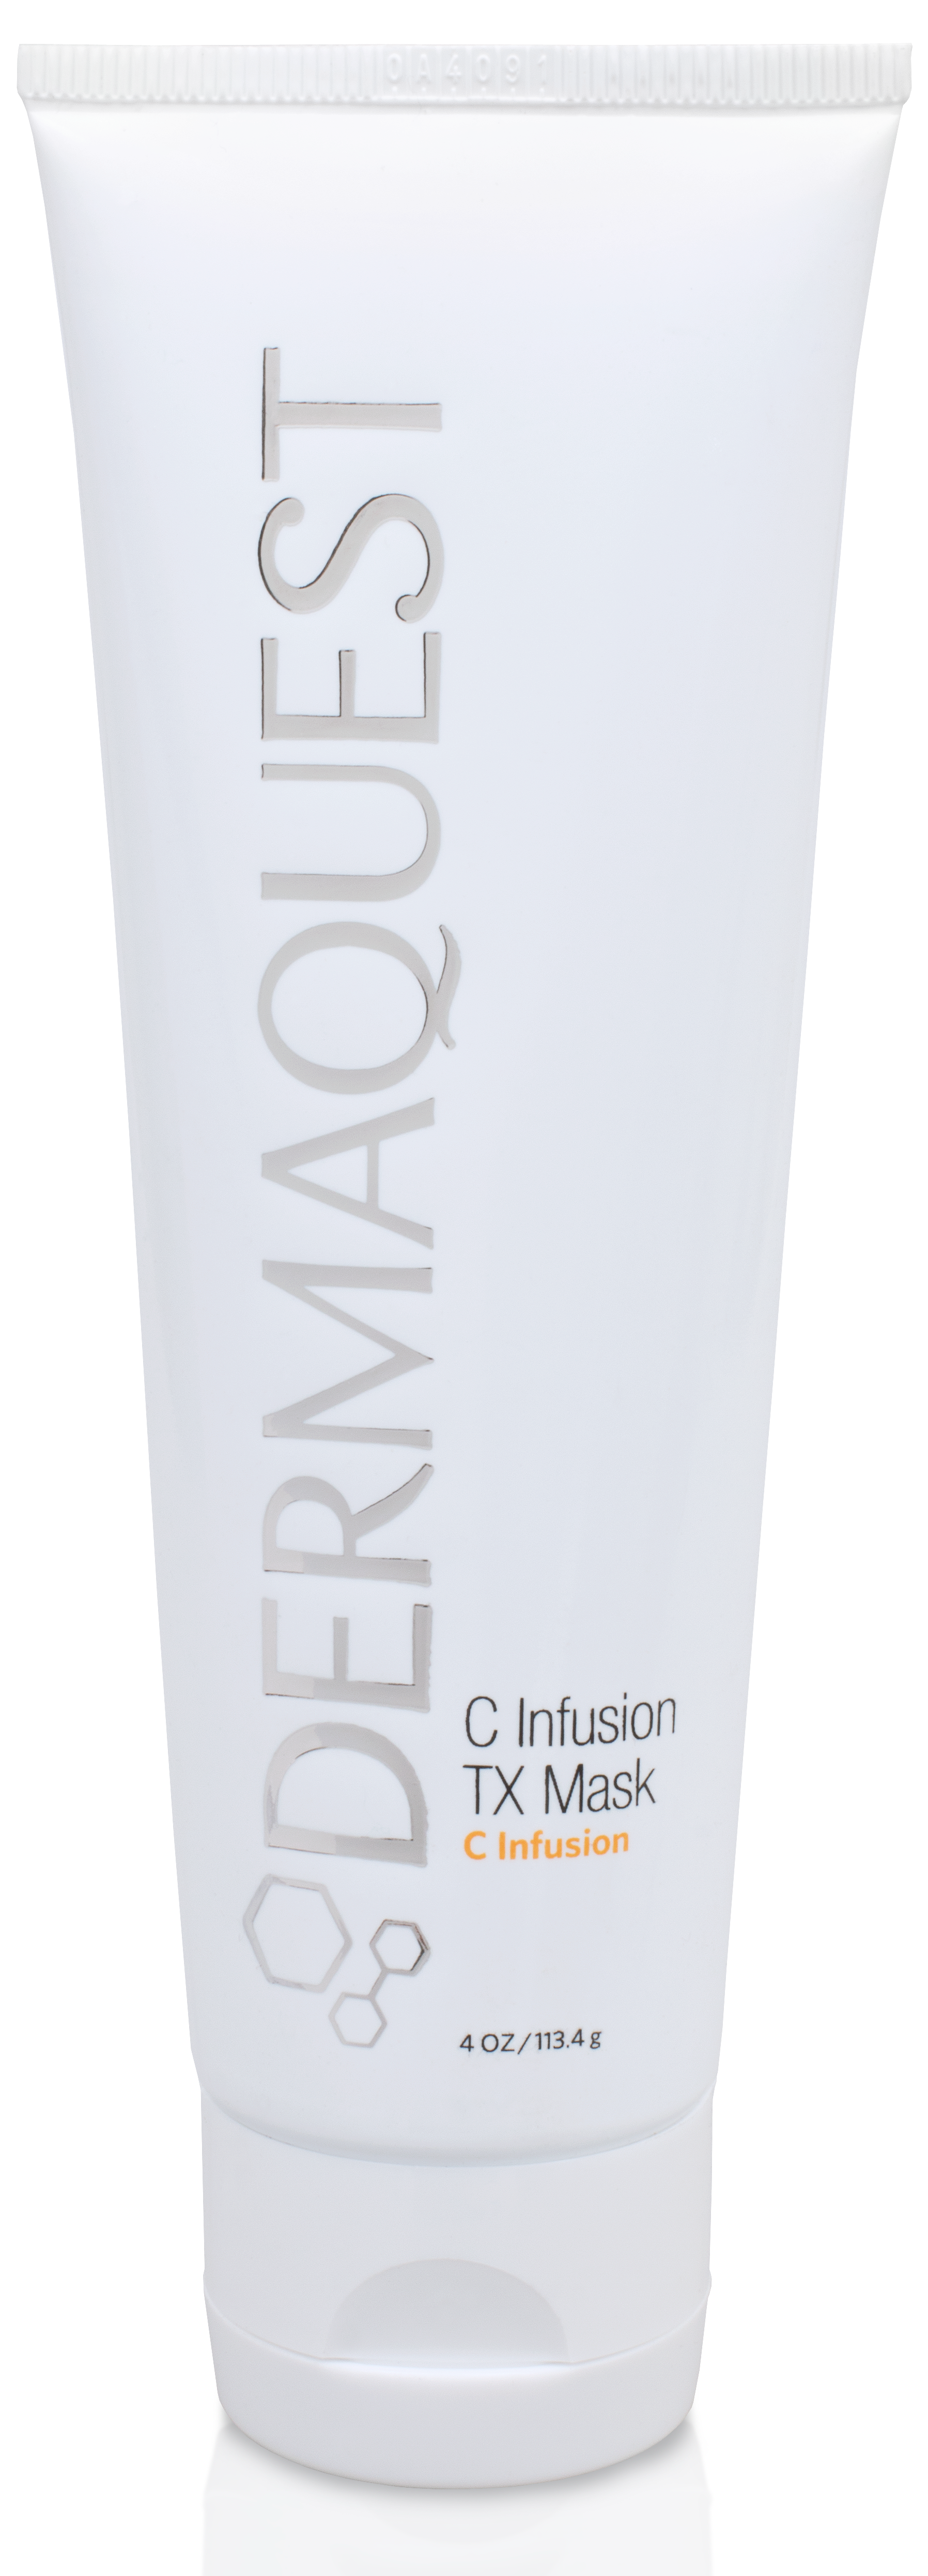 DERMAQUEST C Infusion抗氧美白面膜 (C Infusion TX Mask) - Zkin Shop